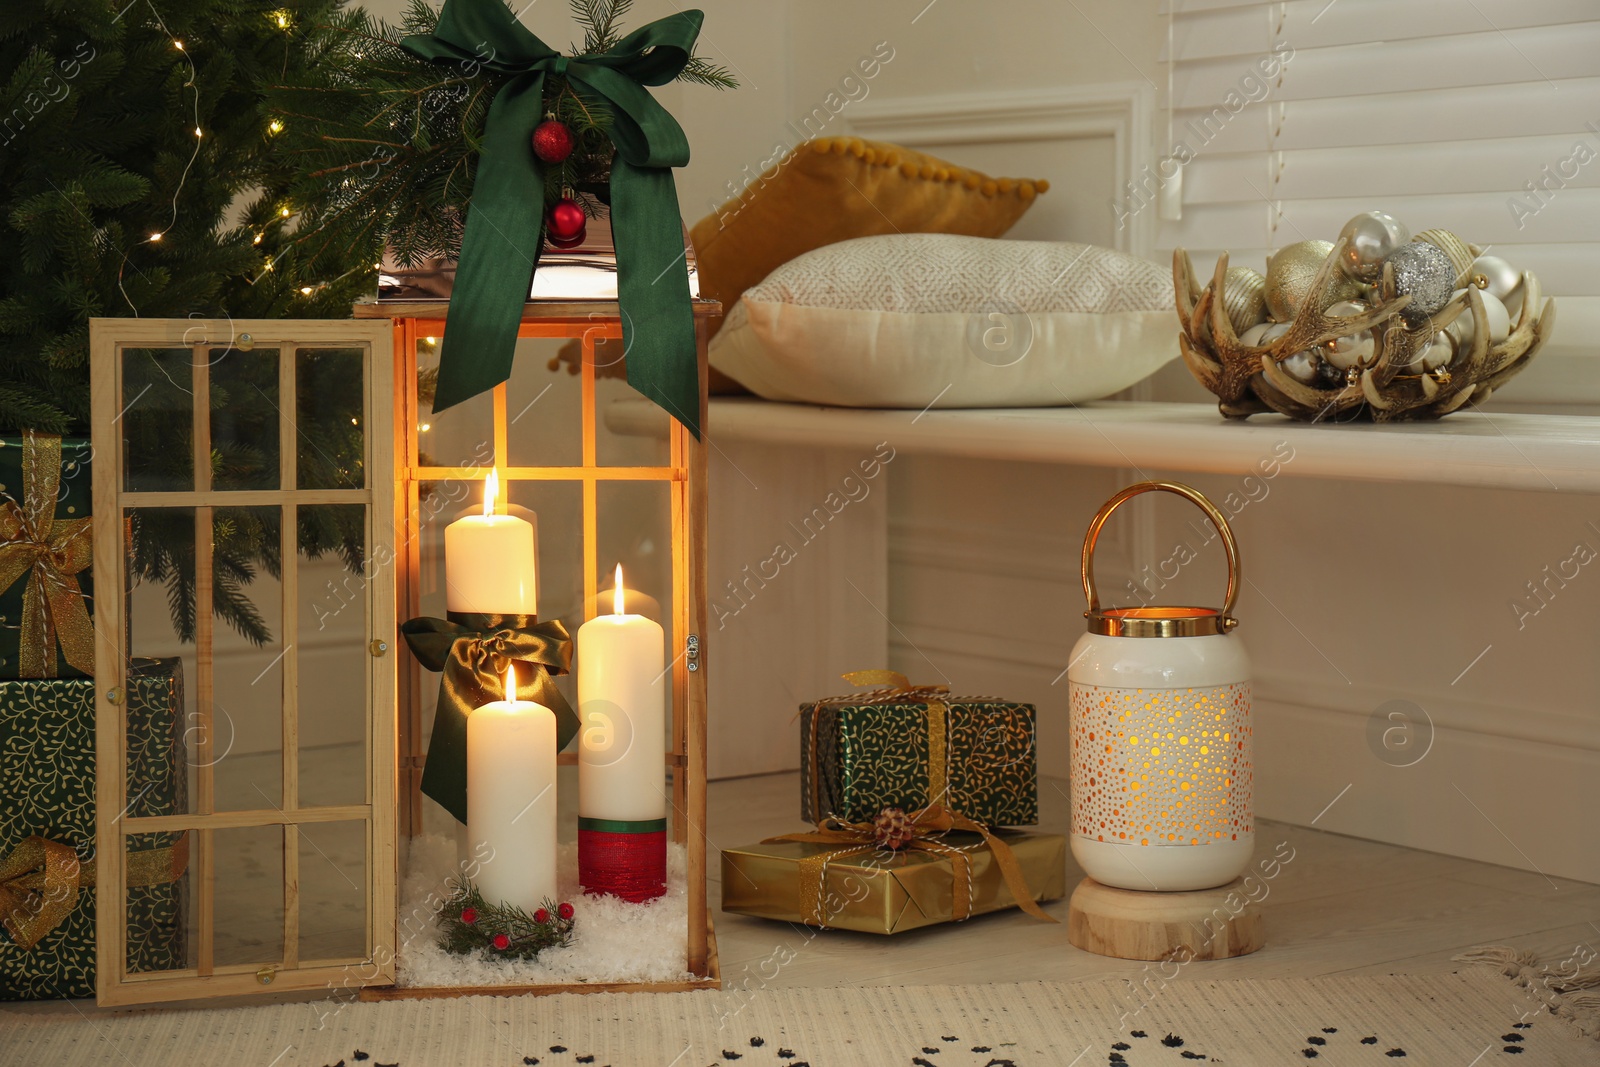 Photo of Wooden decorative lanterns with burning candles near Christmas tree in room